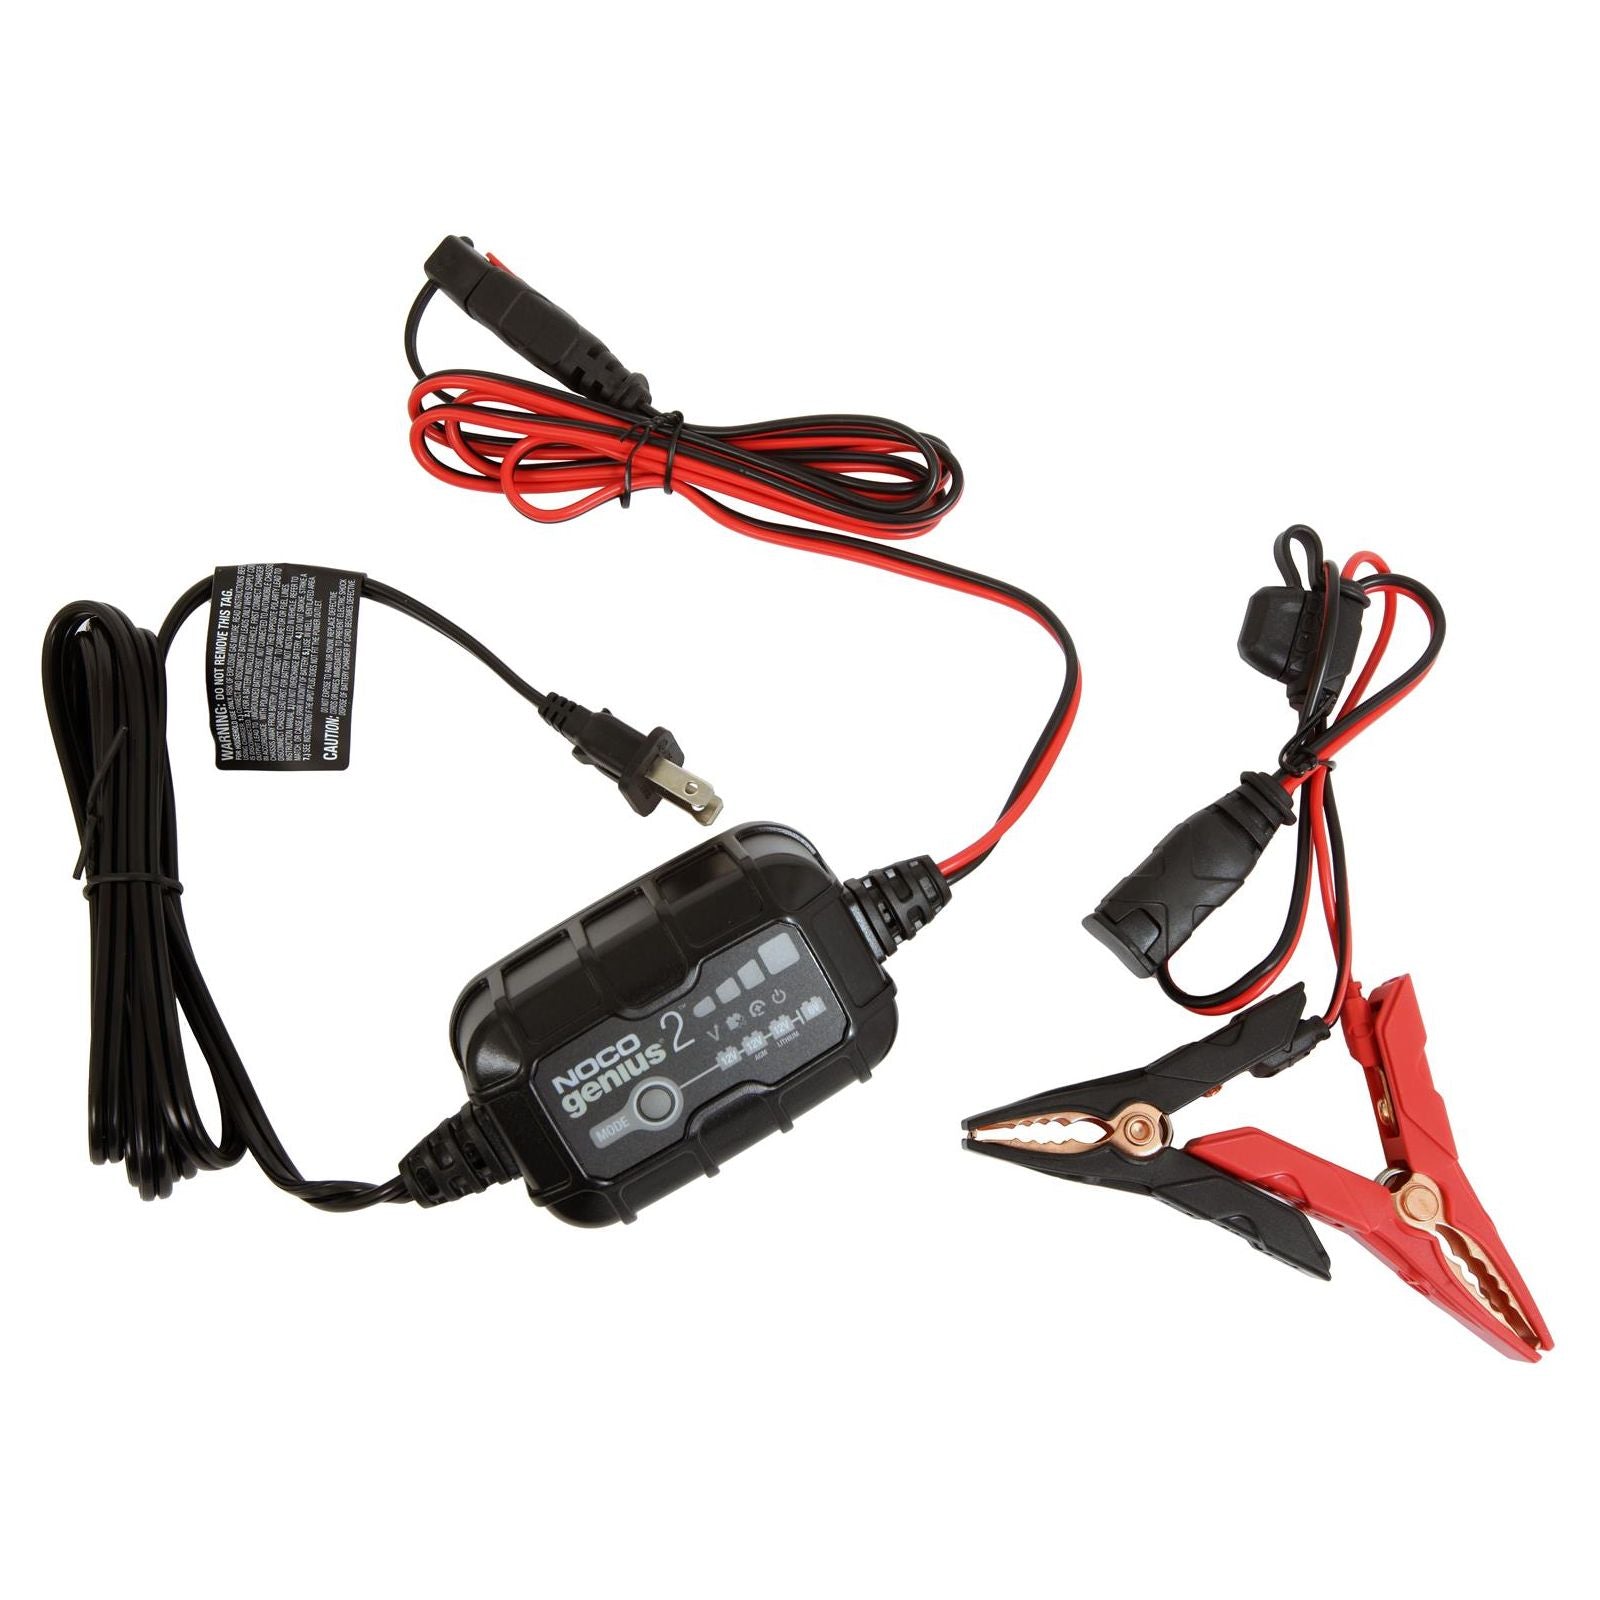 NOCO 2 Amps Battery Charger and Maintainer GENIUS2